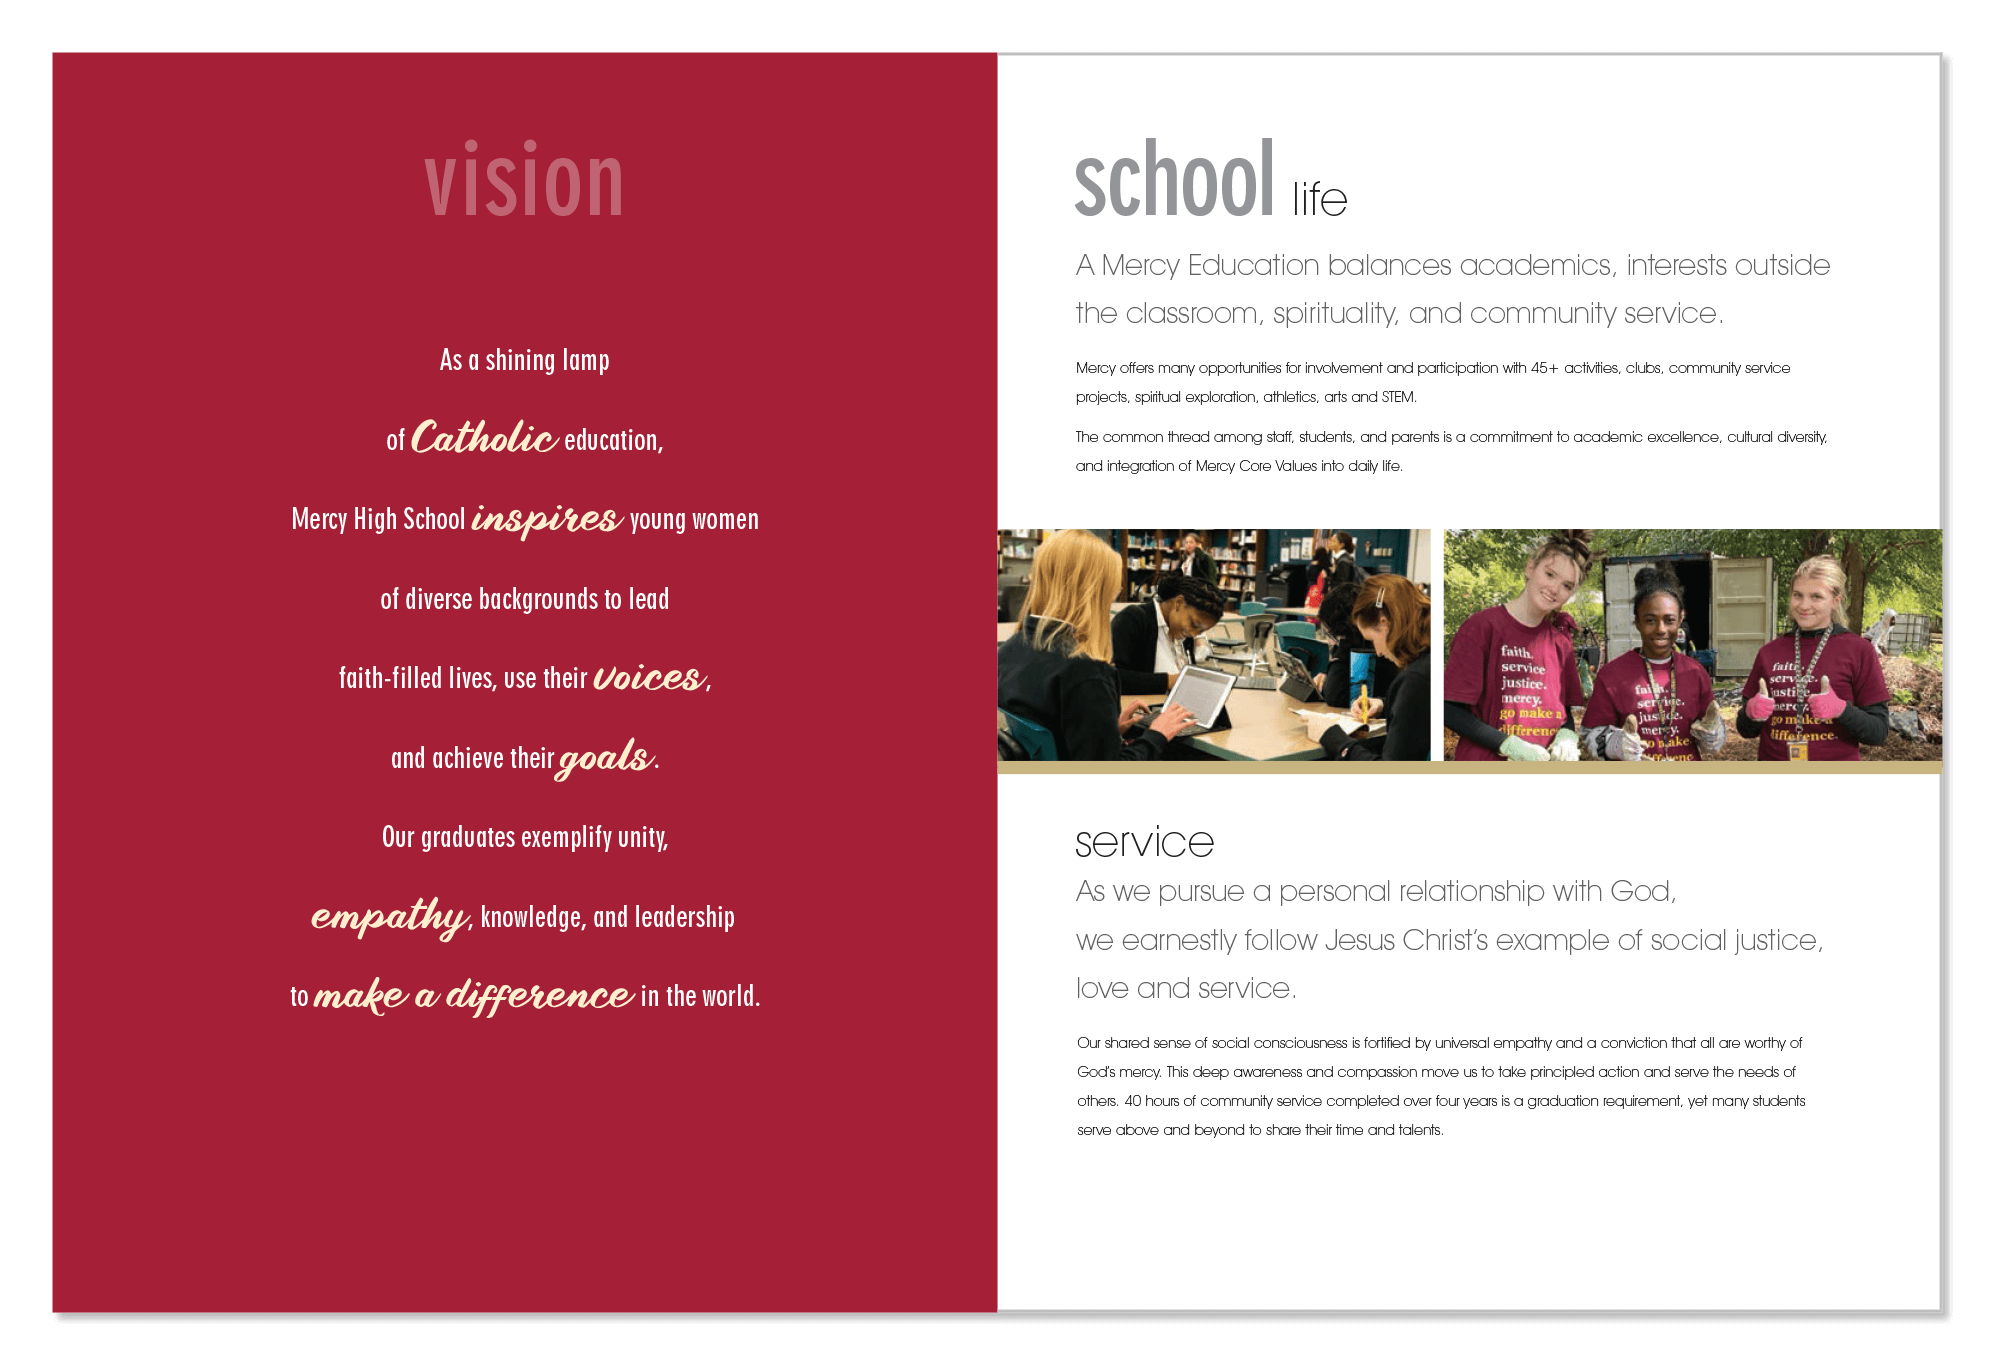 admissions brochure vision and school life pages